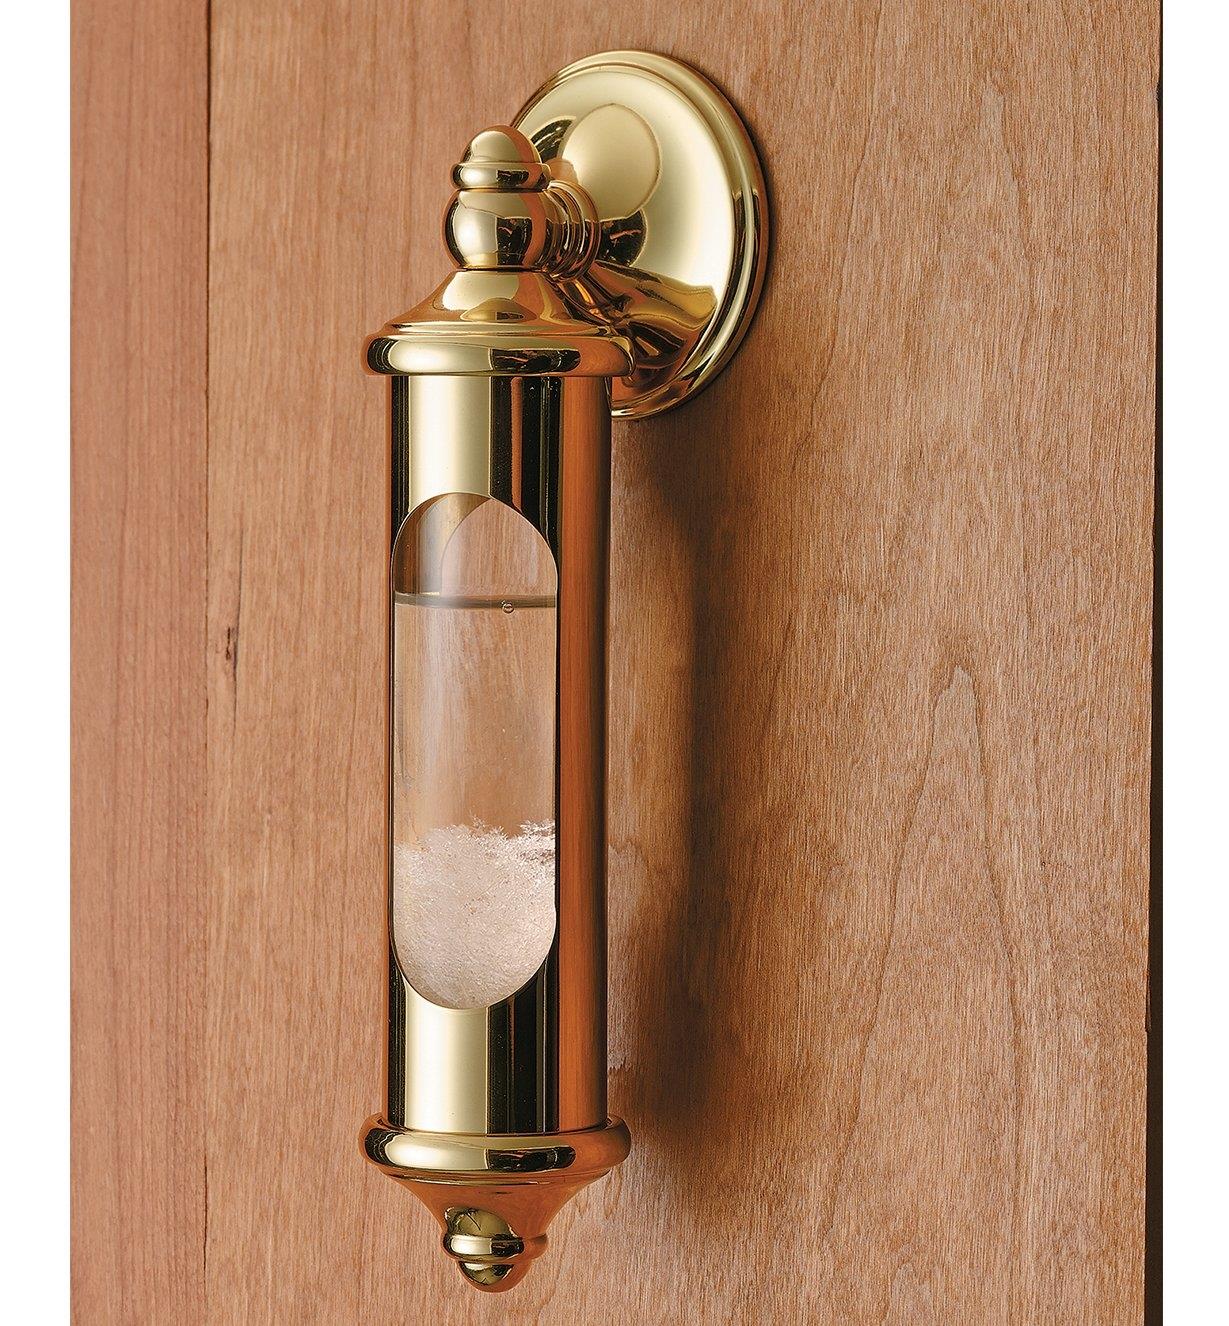 Admiral FitzRoy's Stormglass mounted to a wall using the optional wall mount